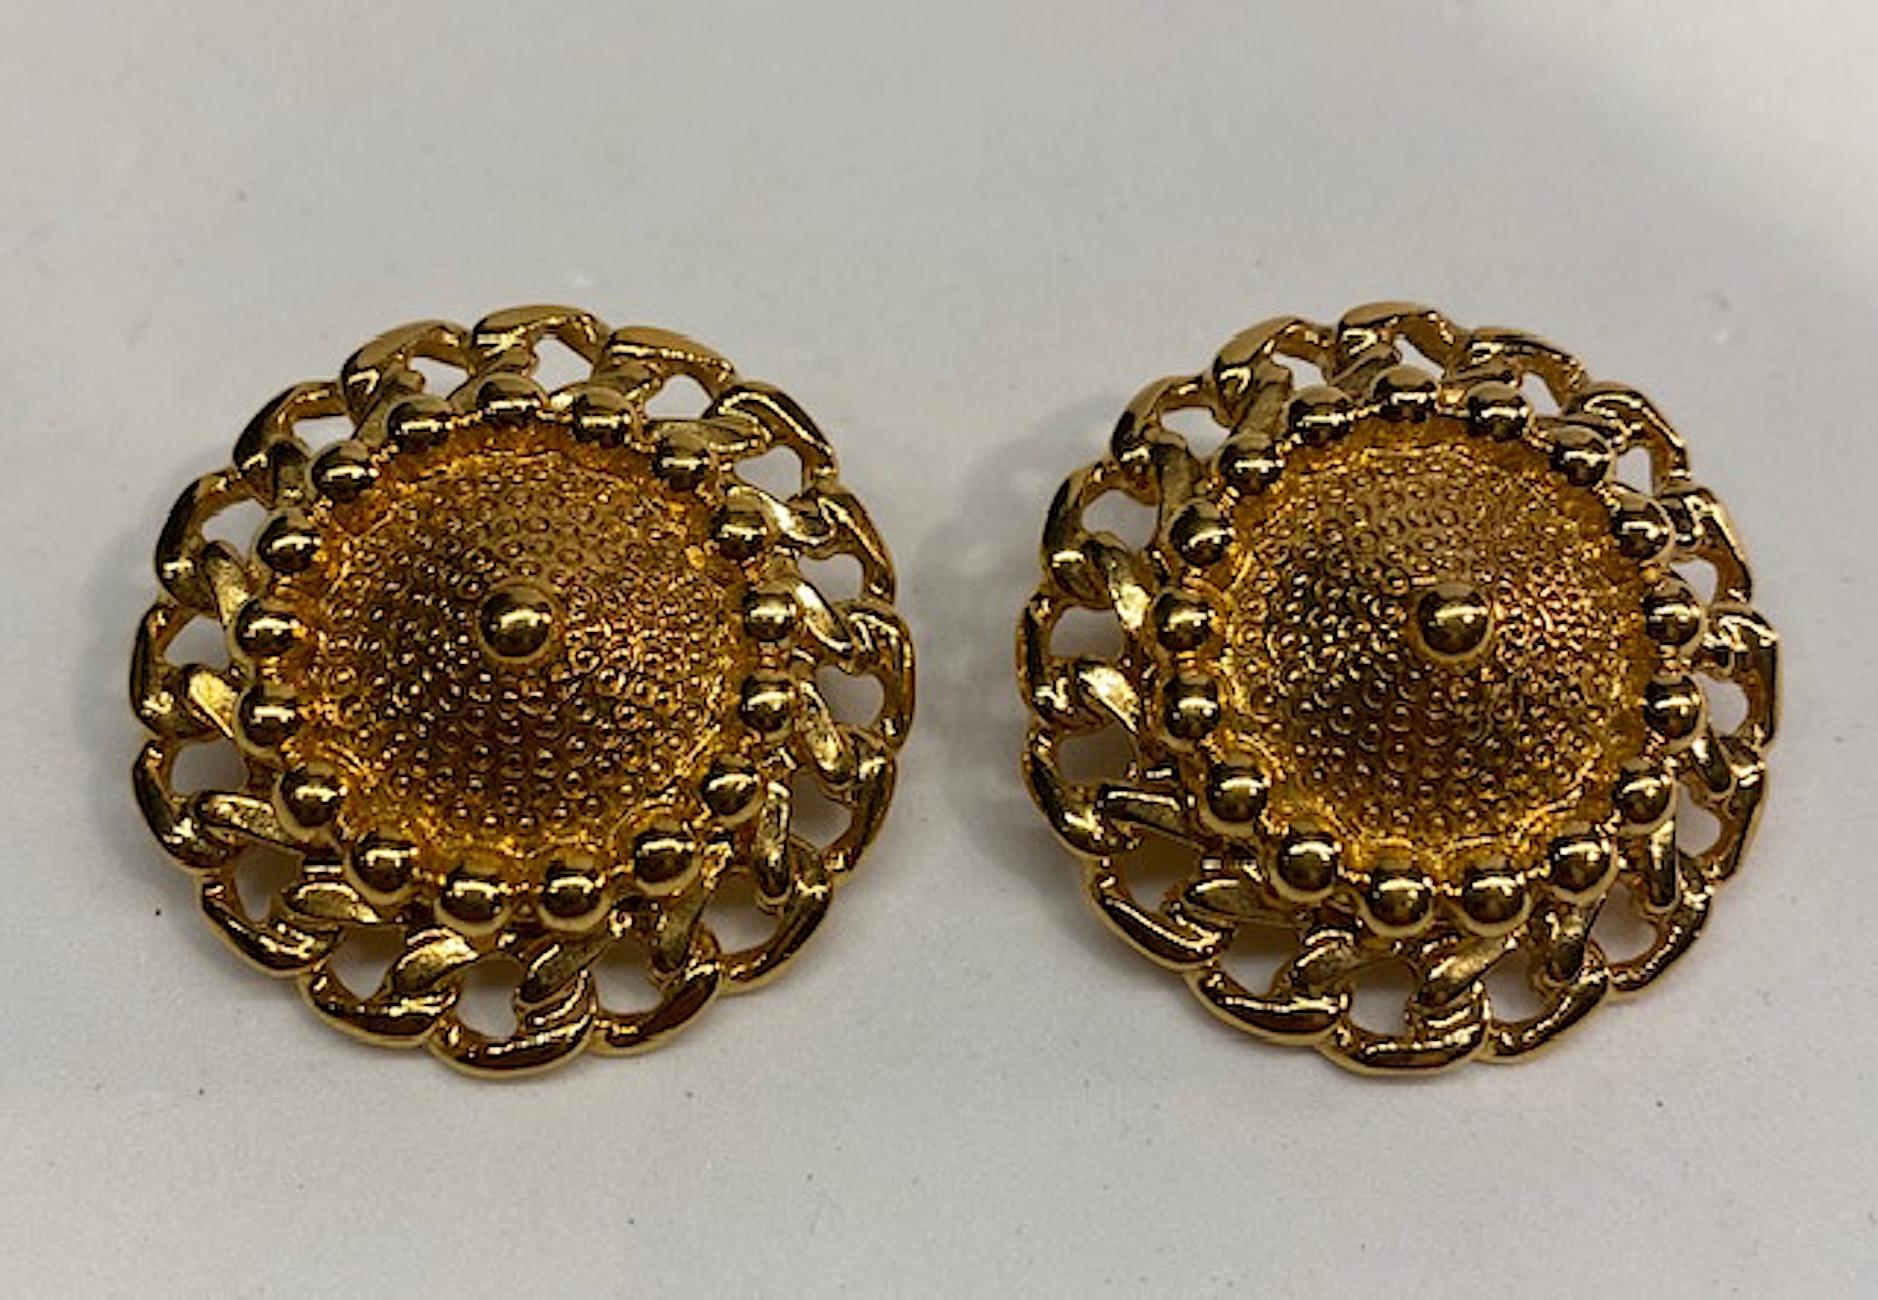 Excellent condition Nina Ricci 1980s gold tone domed button earrings with bead and curb chain boarder. Each earring is 1.38 inches in diameter and .63 of an inch high including the clip back. Bright and shiny gold plate. Back of clip stamped Nina